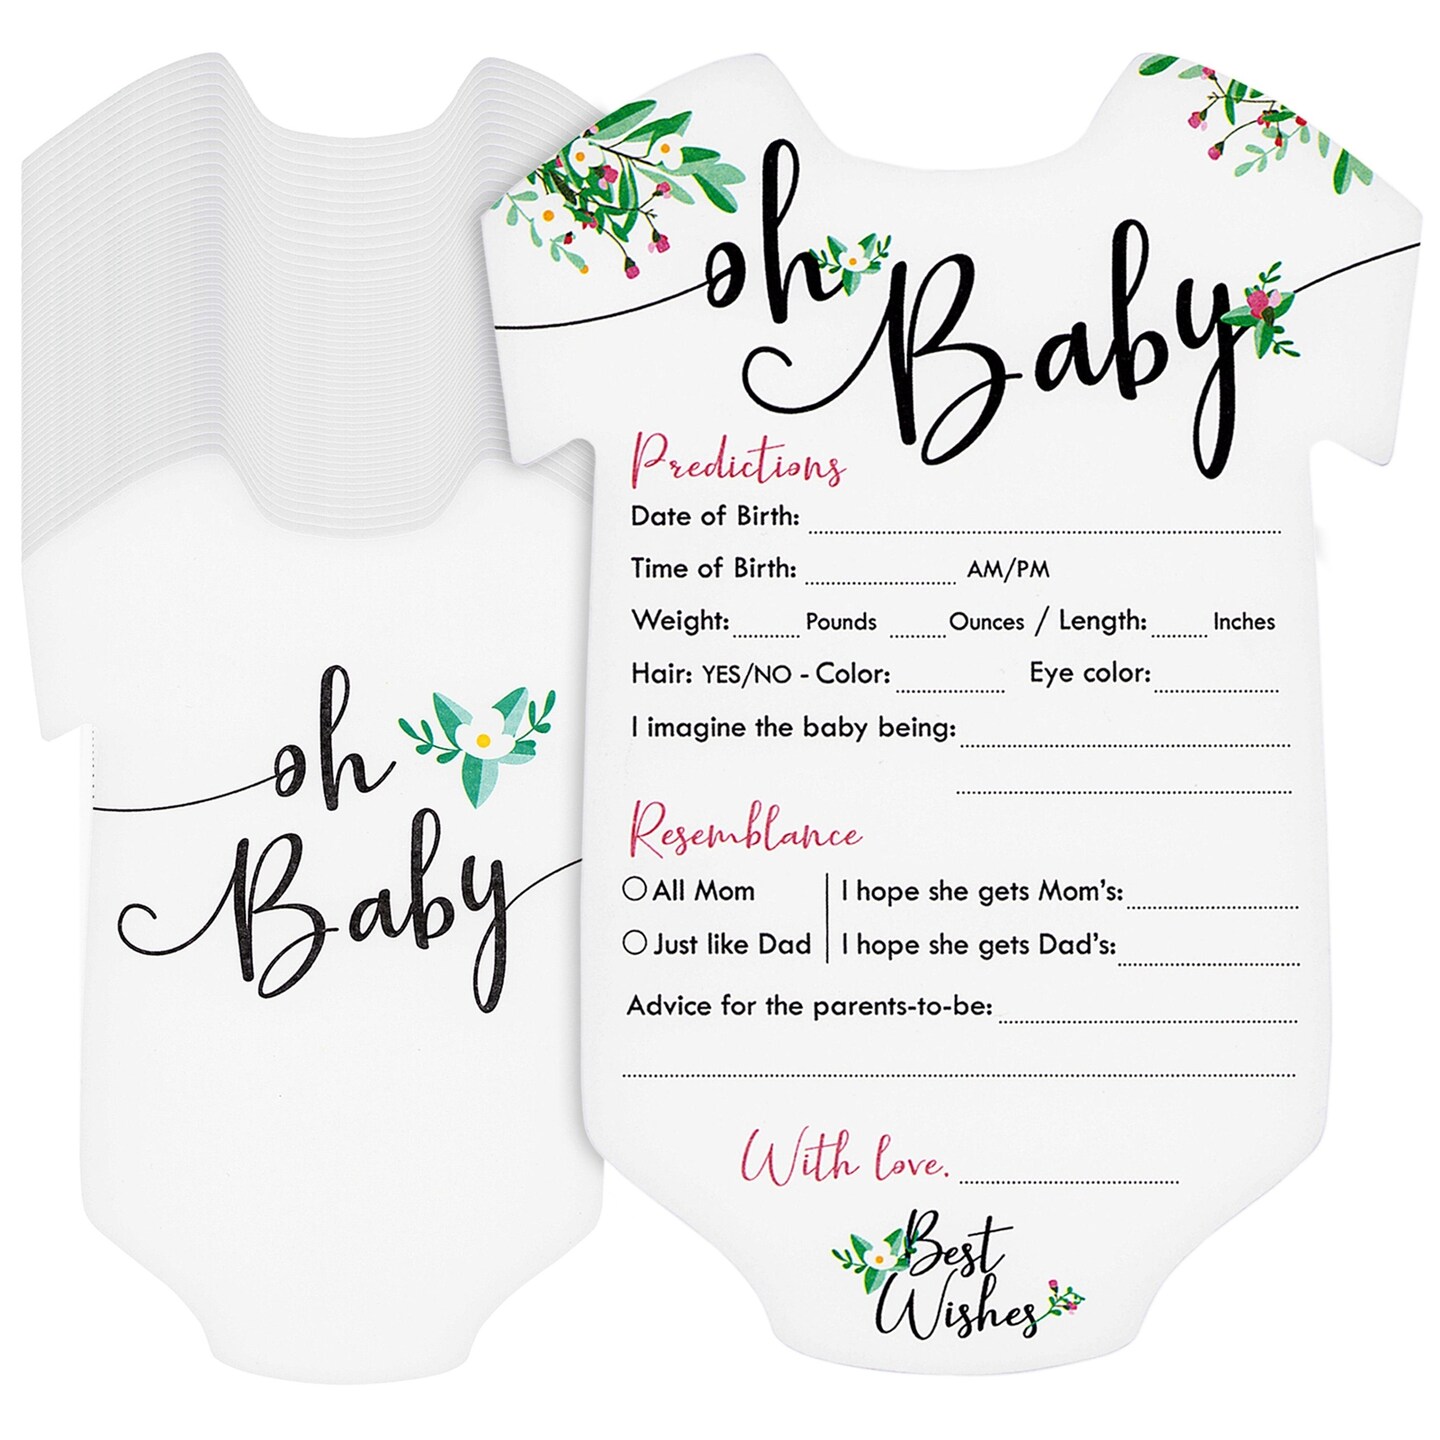 Onesie® Decorating Kit for Baby Shower Activity, Iron-on Fabric Appliques 